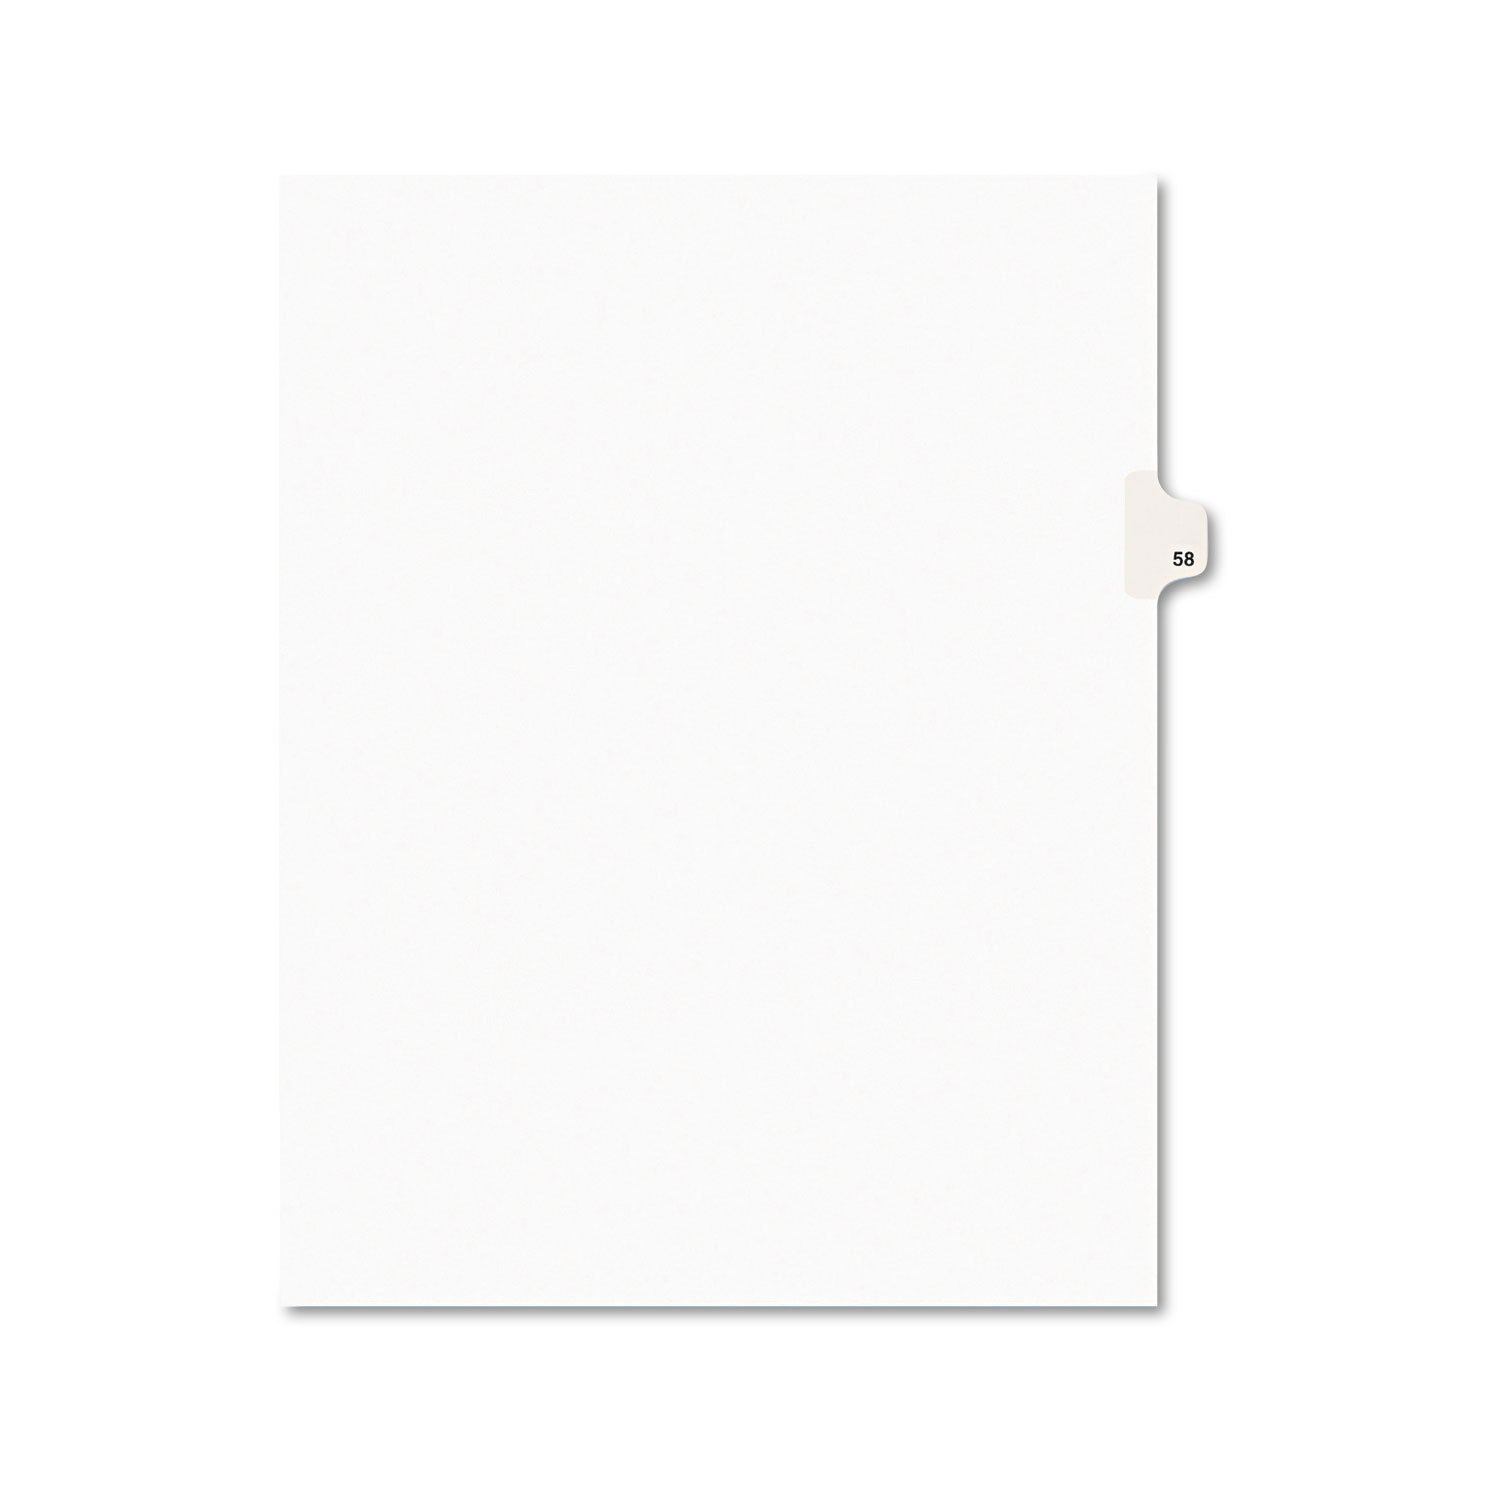  Avery 01058 Preprinted Legal Exhibit Side Tab Index Dividers, Avery Style, 10-Tab, 58, 11 x 8.5, White, 25/Pack (AVE01058) 